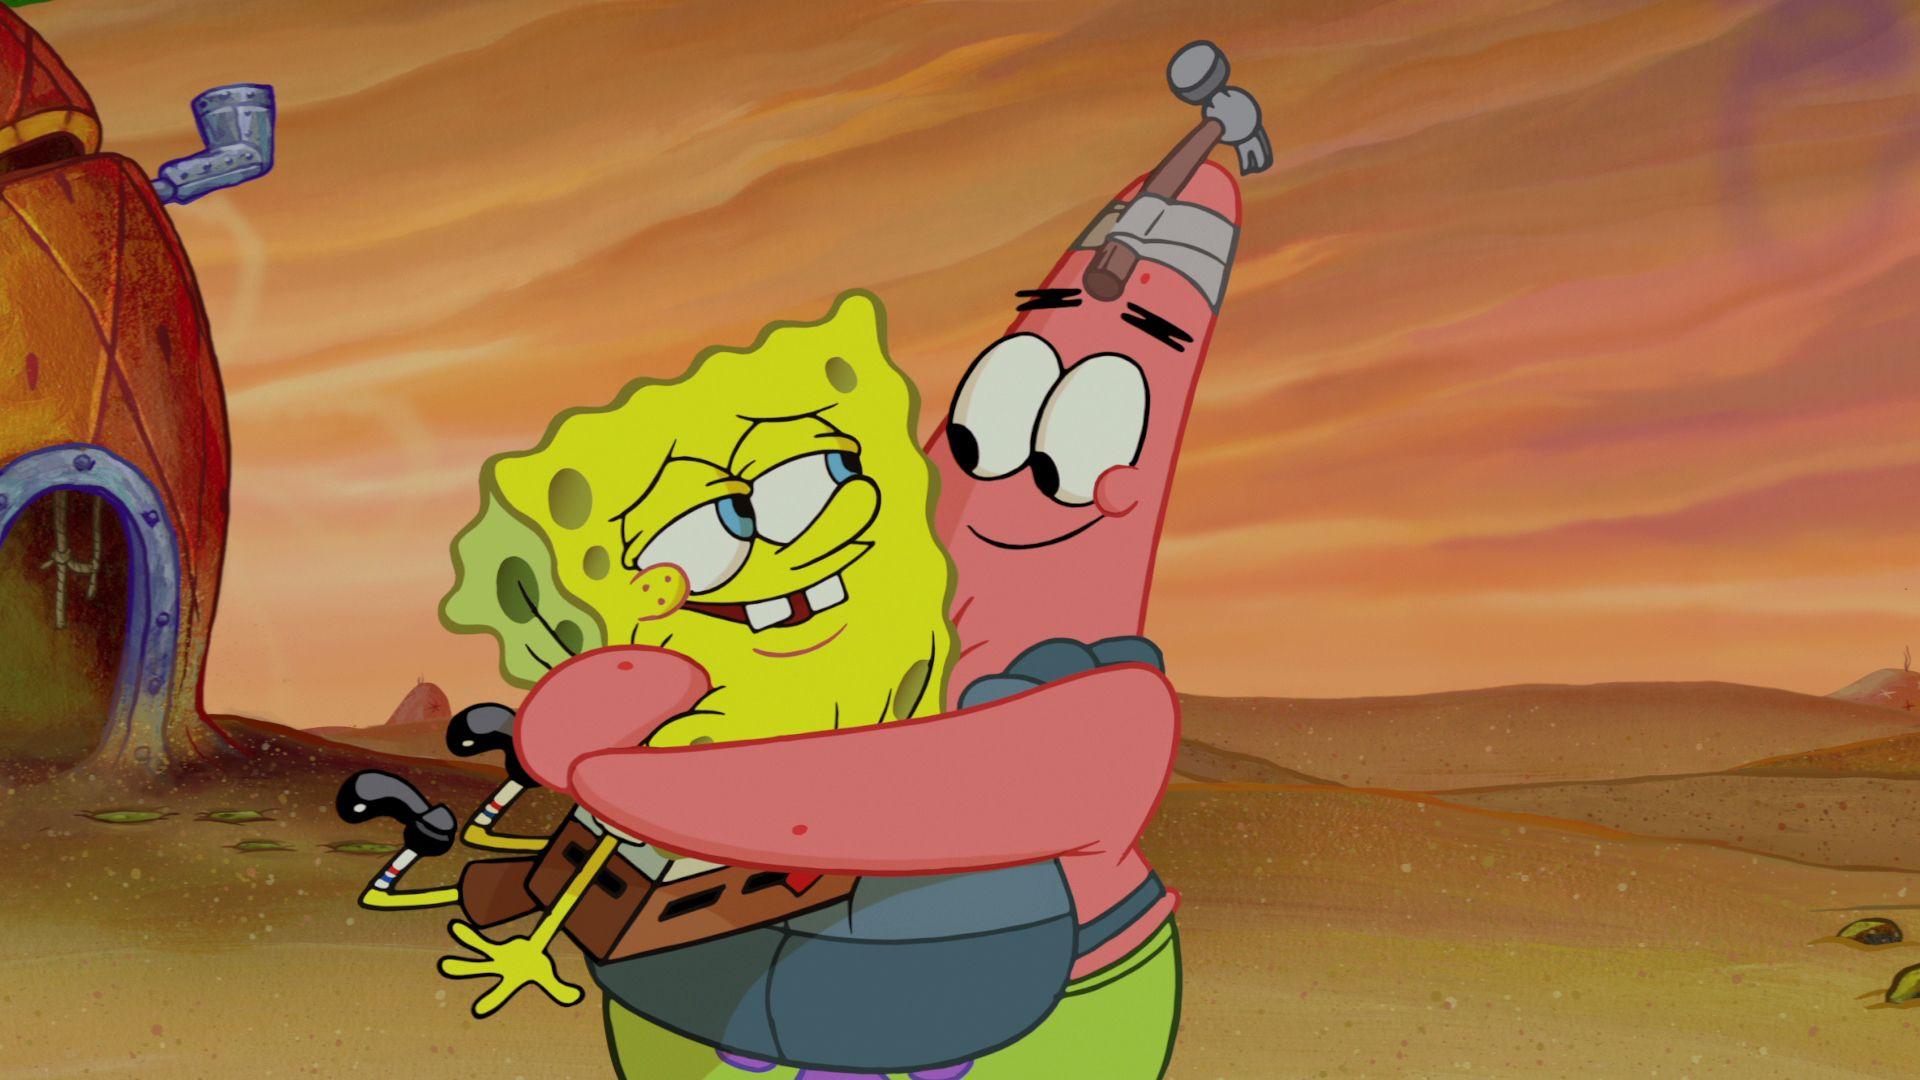 Strong Picture Of Patrick And Spongebob Image Hugs Jpg The Parody